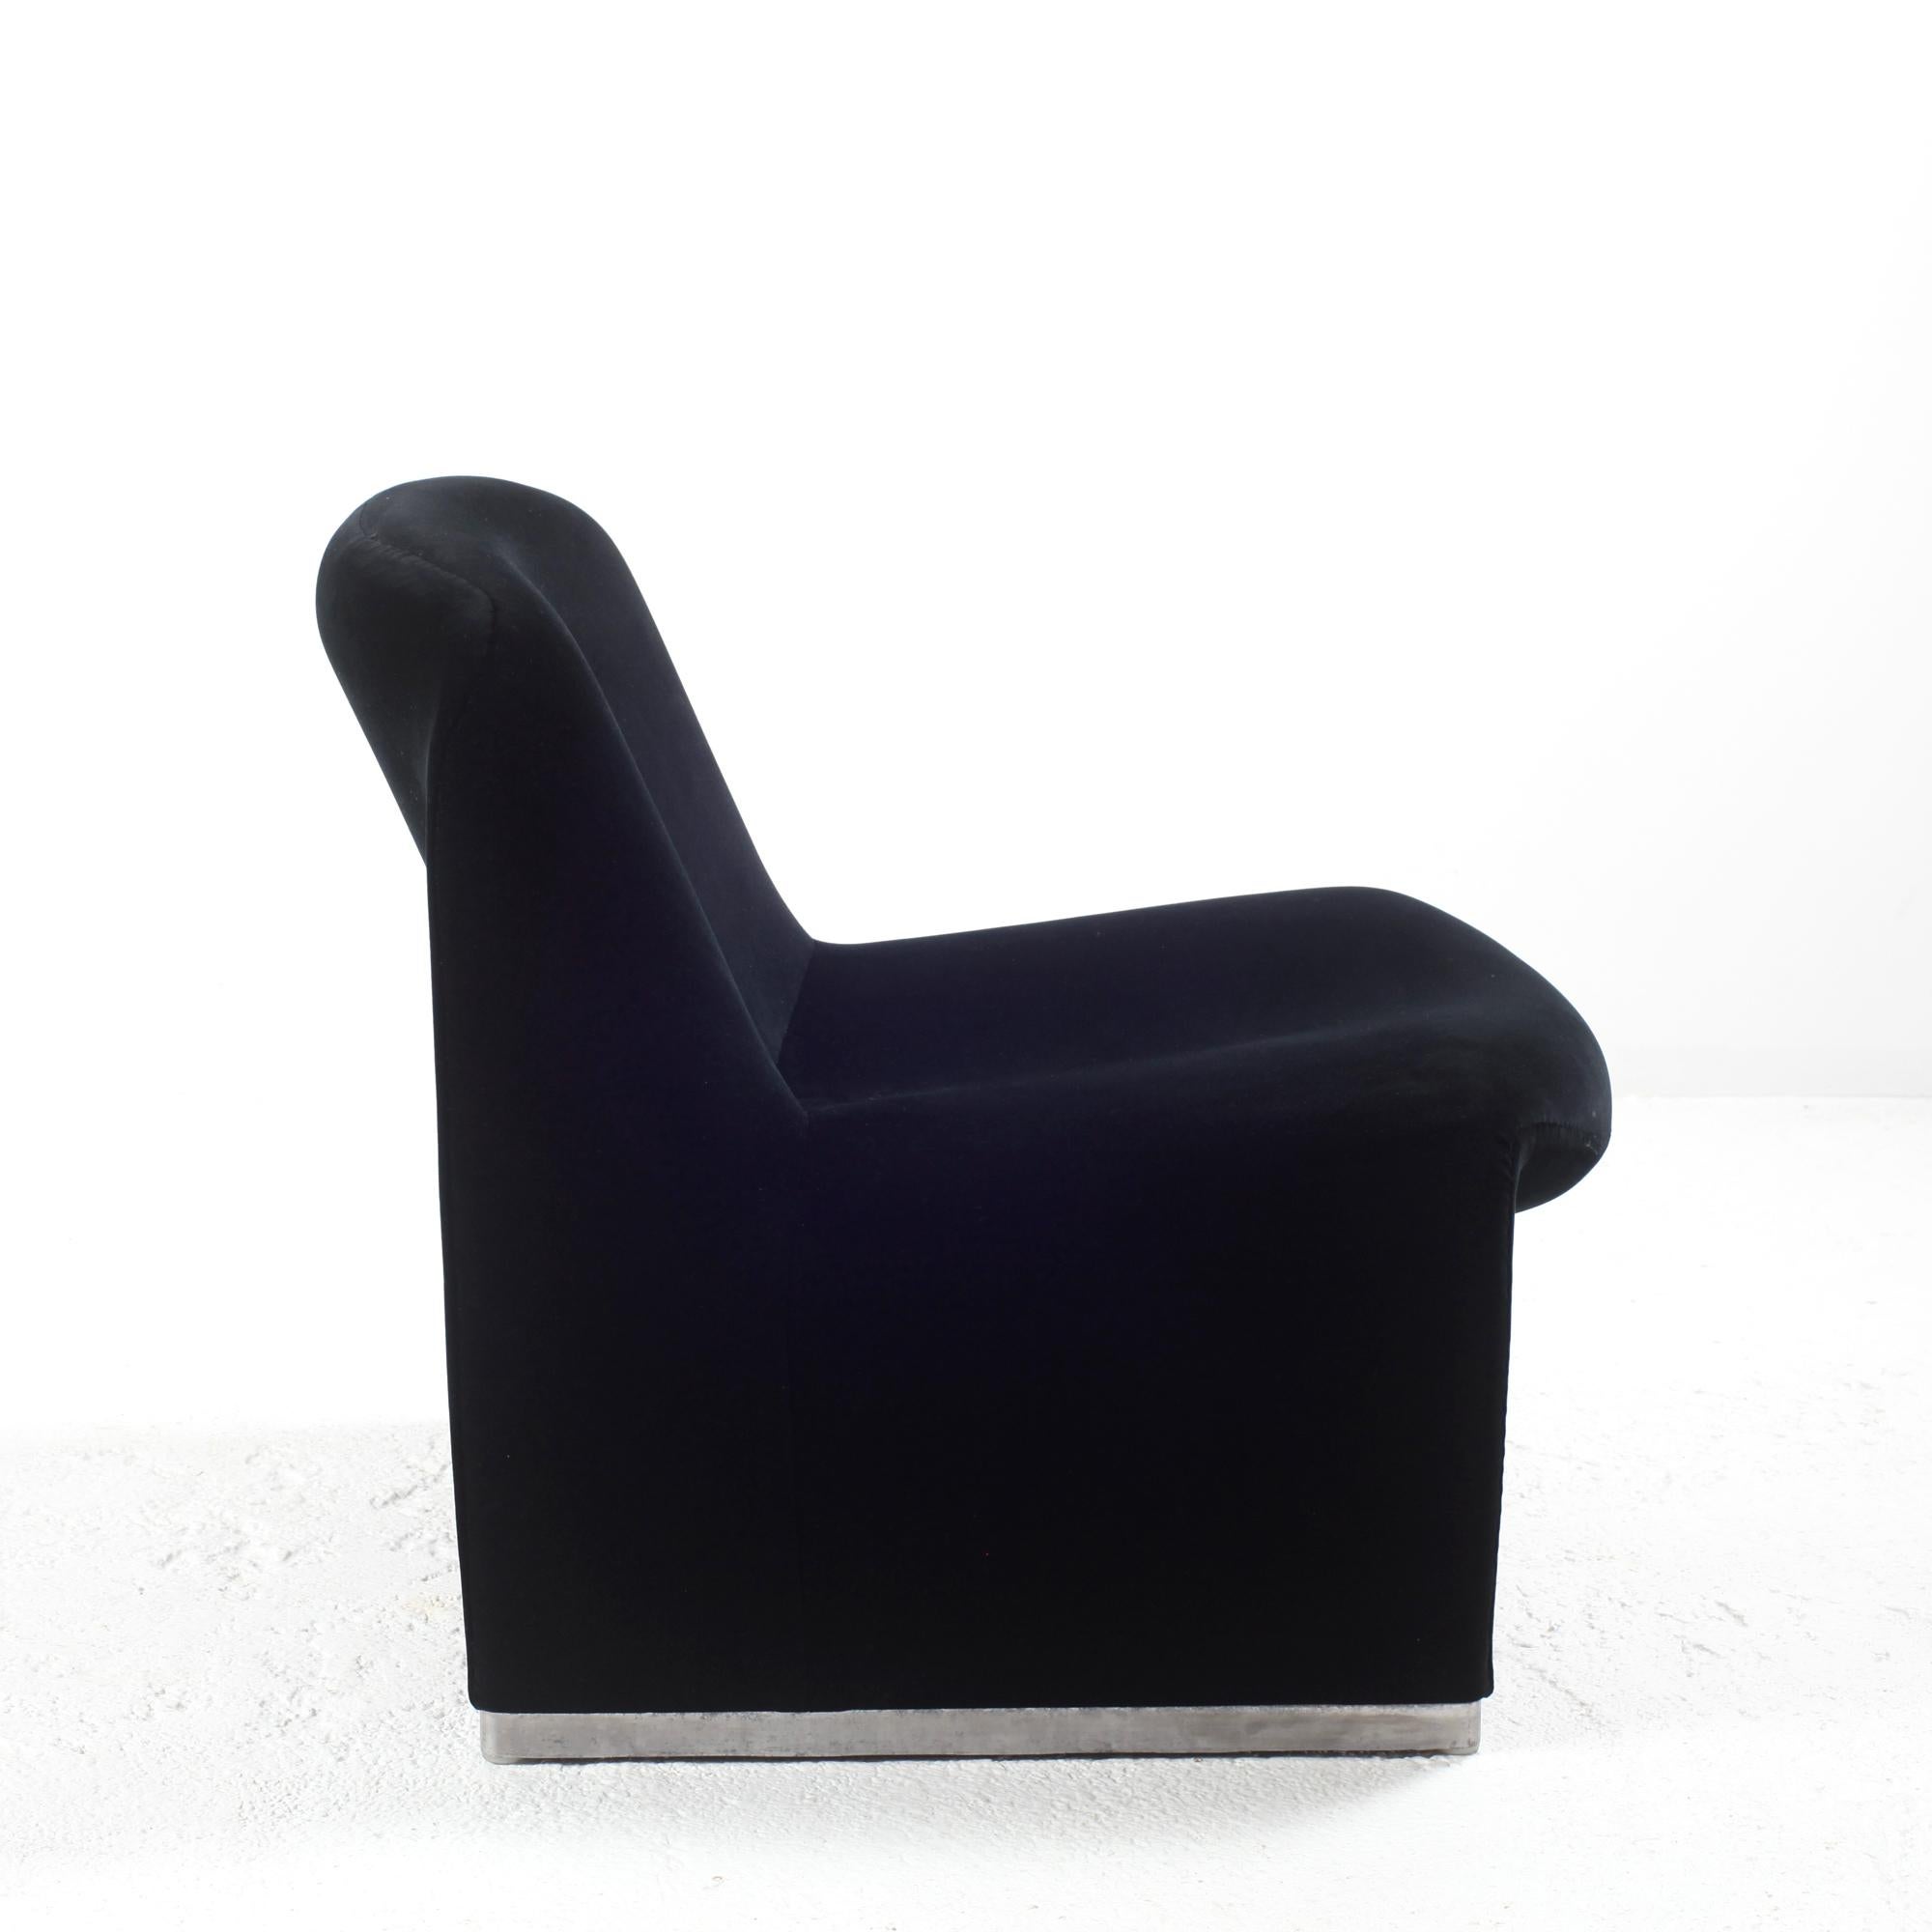 Late 20th Century Giancarlo Piretti “Alky” Chair in New Black Velvet, for Castelli Italy, 1970s